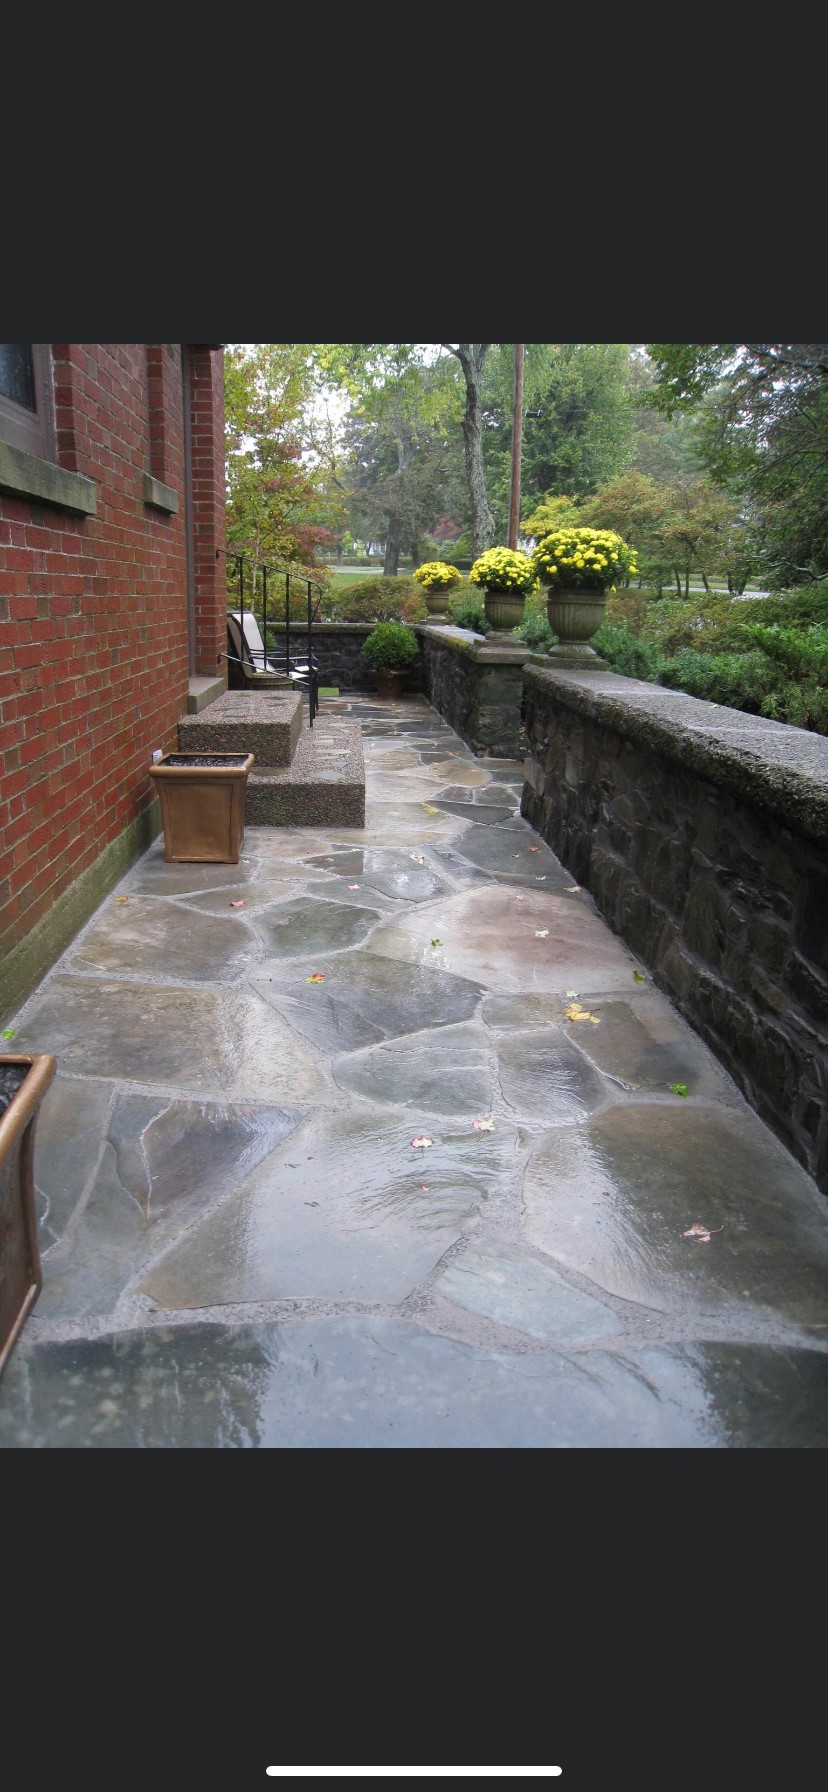 A scotia stone patio with a brick wall in the background.